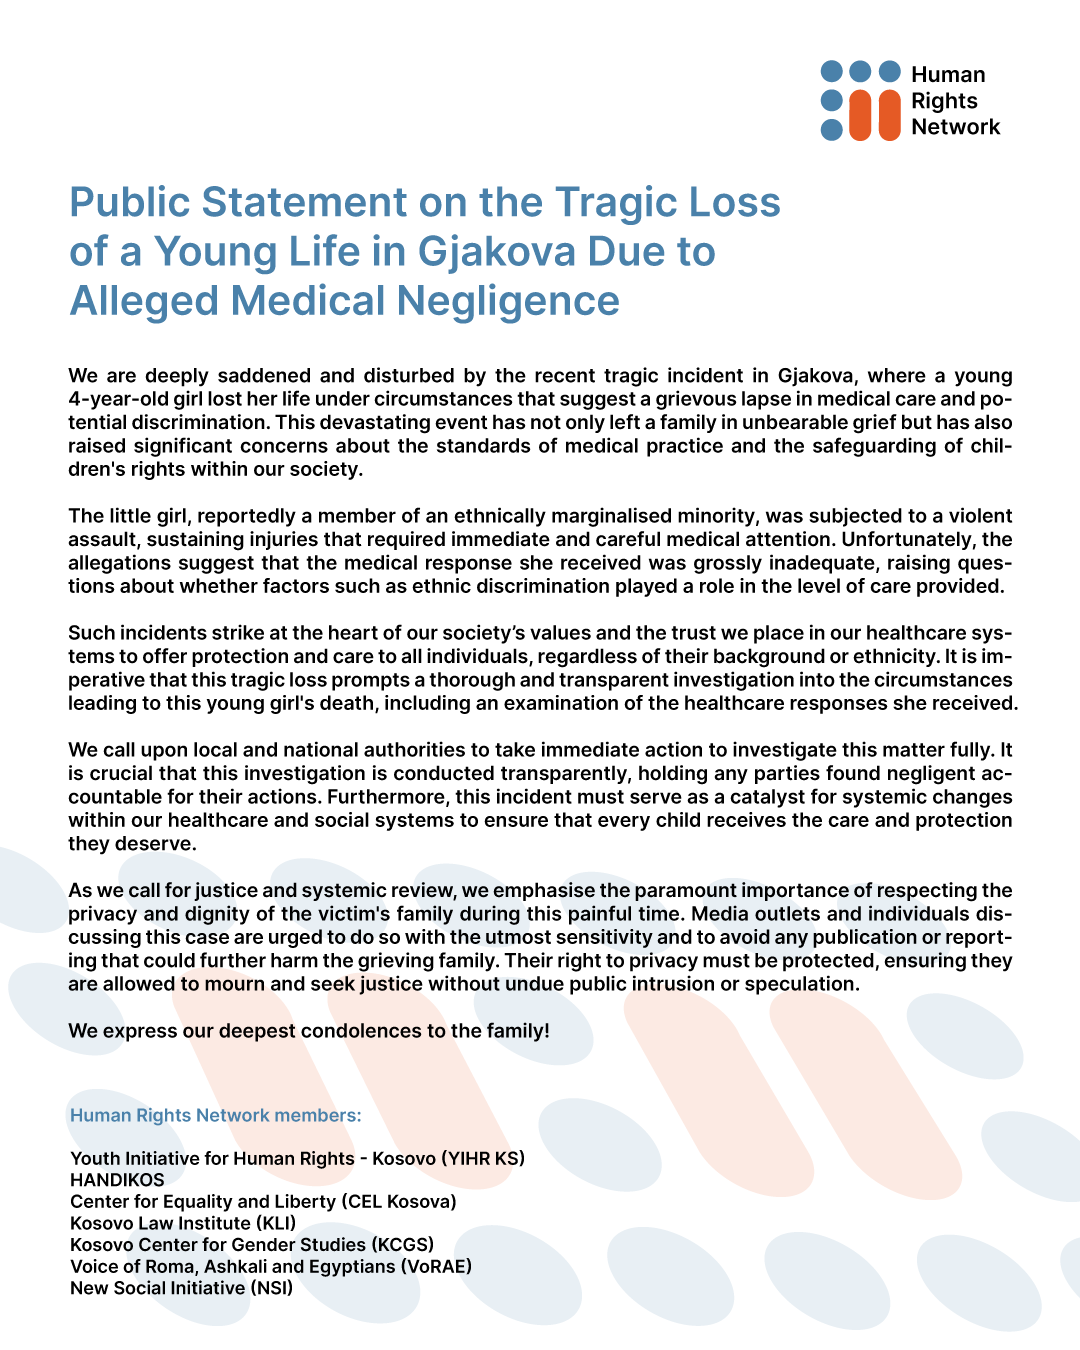 Public Statement on the Tragic Loss of a Young Life in Gjakova Due to Alleged Medical Negligence